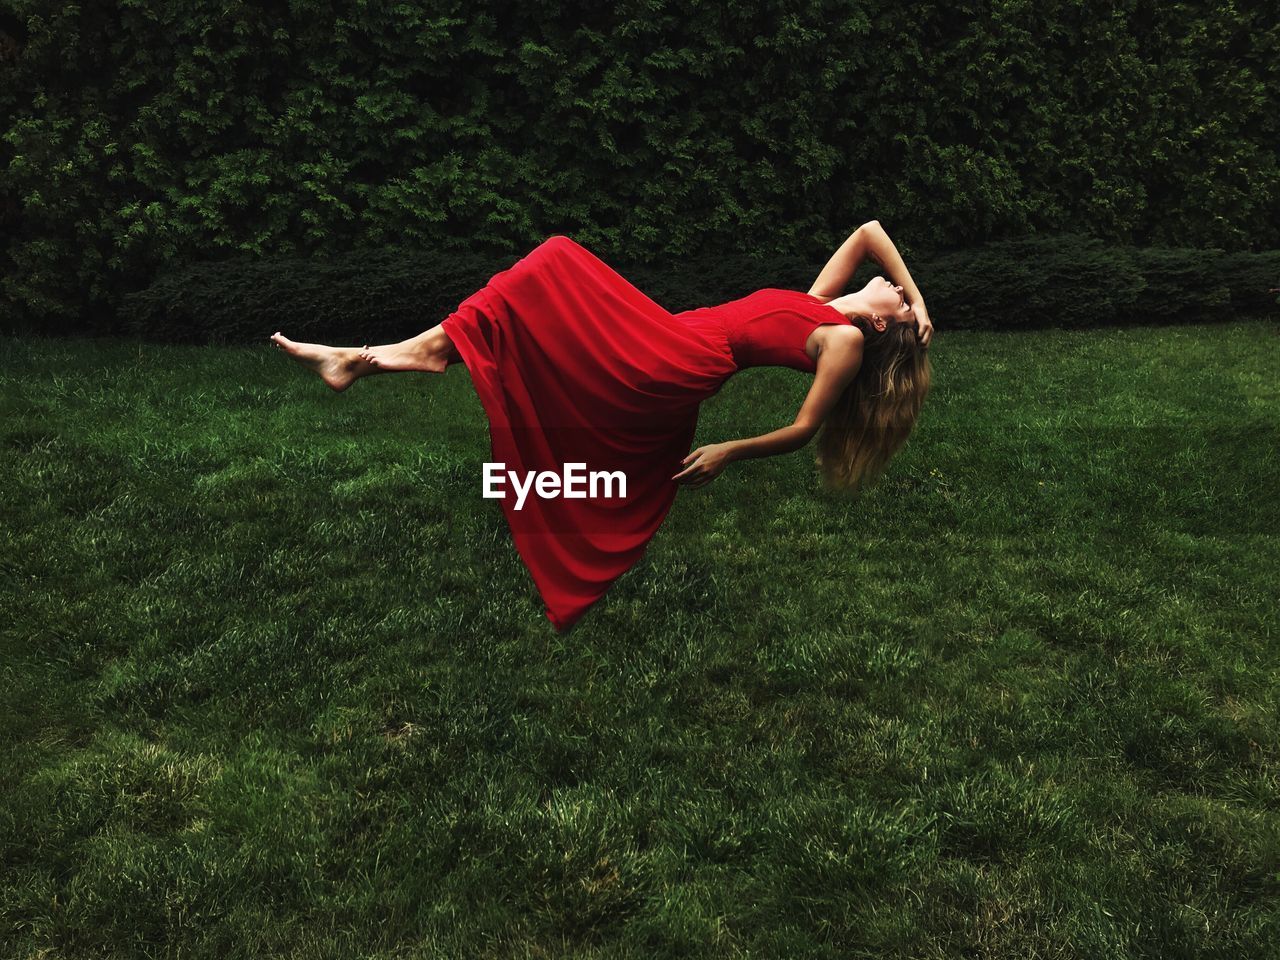 Digital composite image of woman wearing dress while lying in air over field